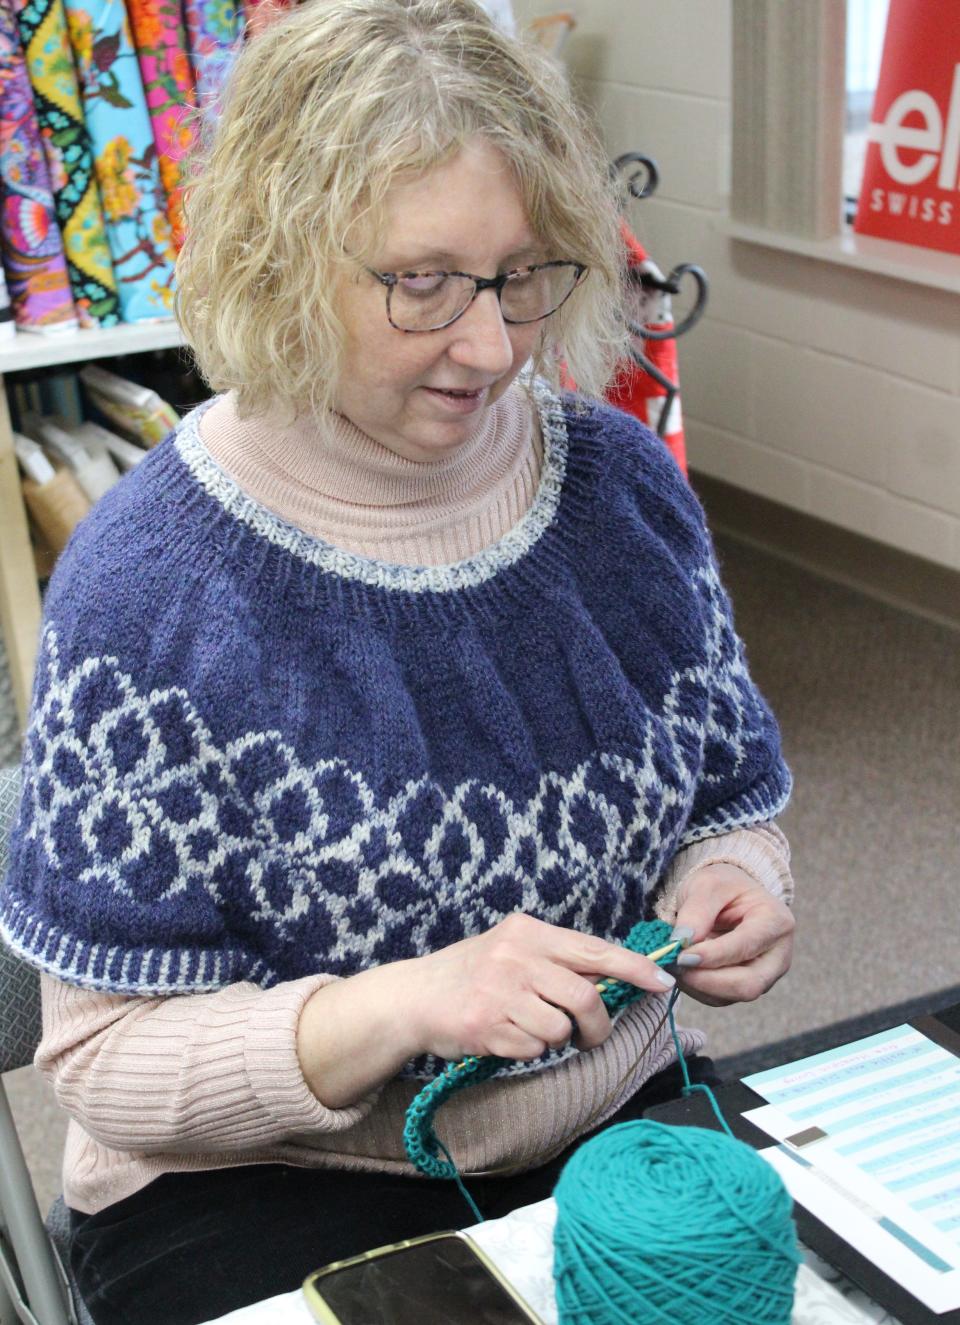 Using teal cotton yarn, Anna Maiden  knits a dishcloth. The Monroe resident knitted the two-tone capelet she is wearing.